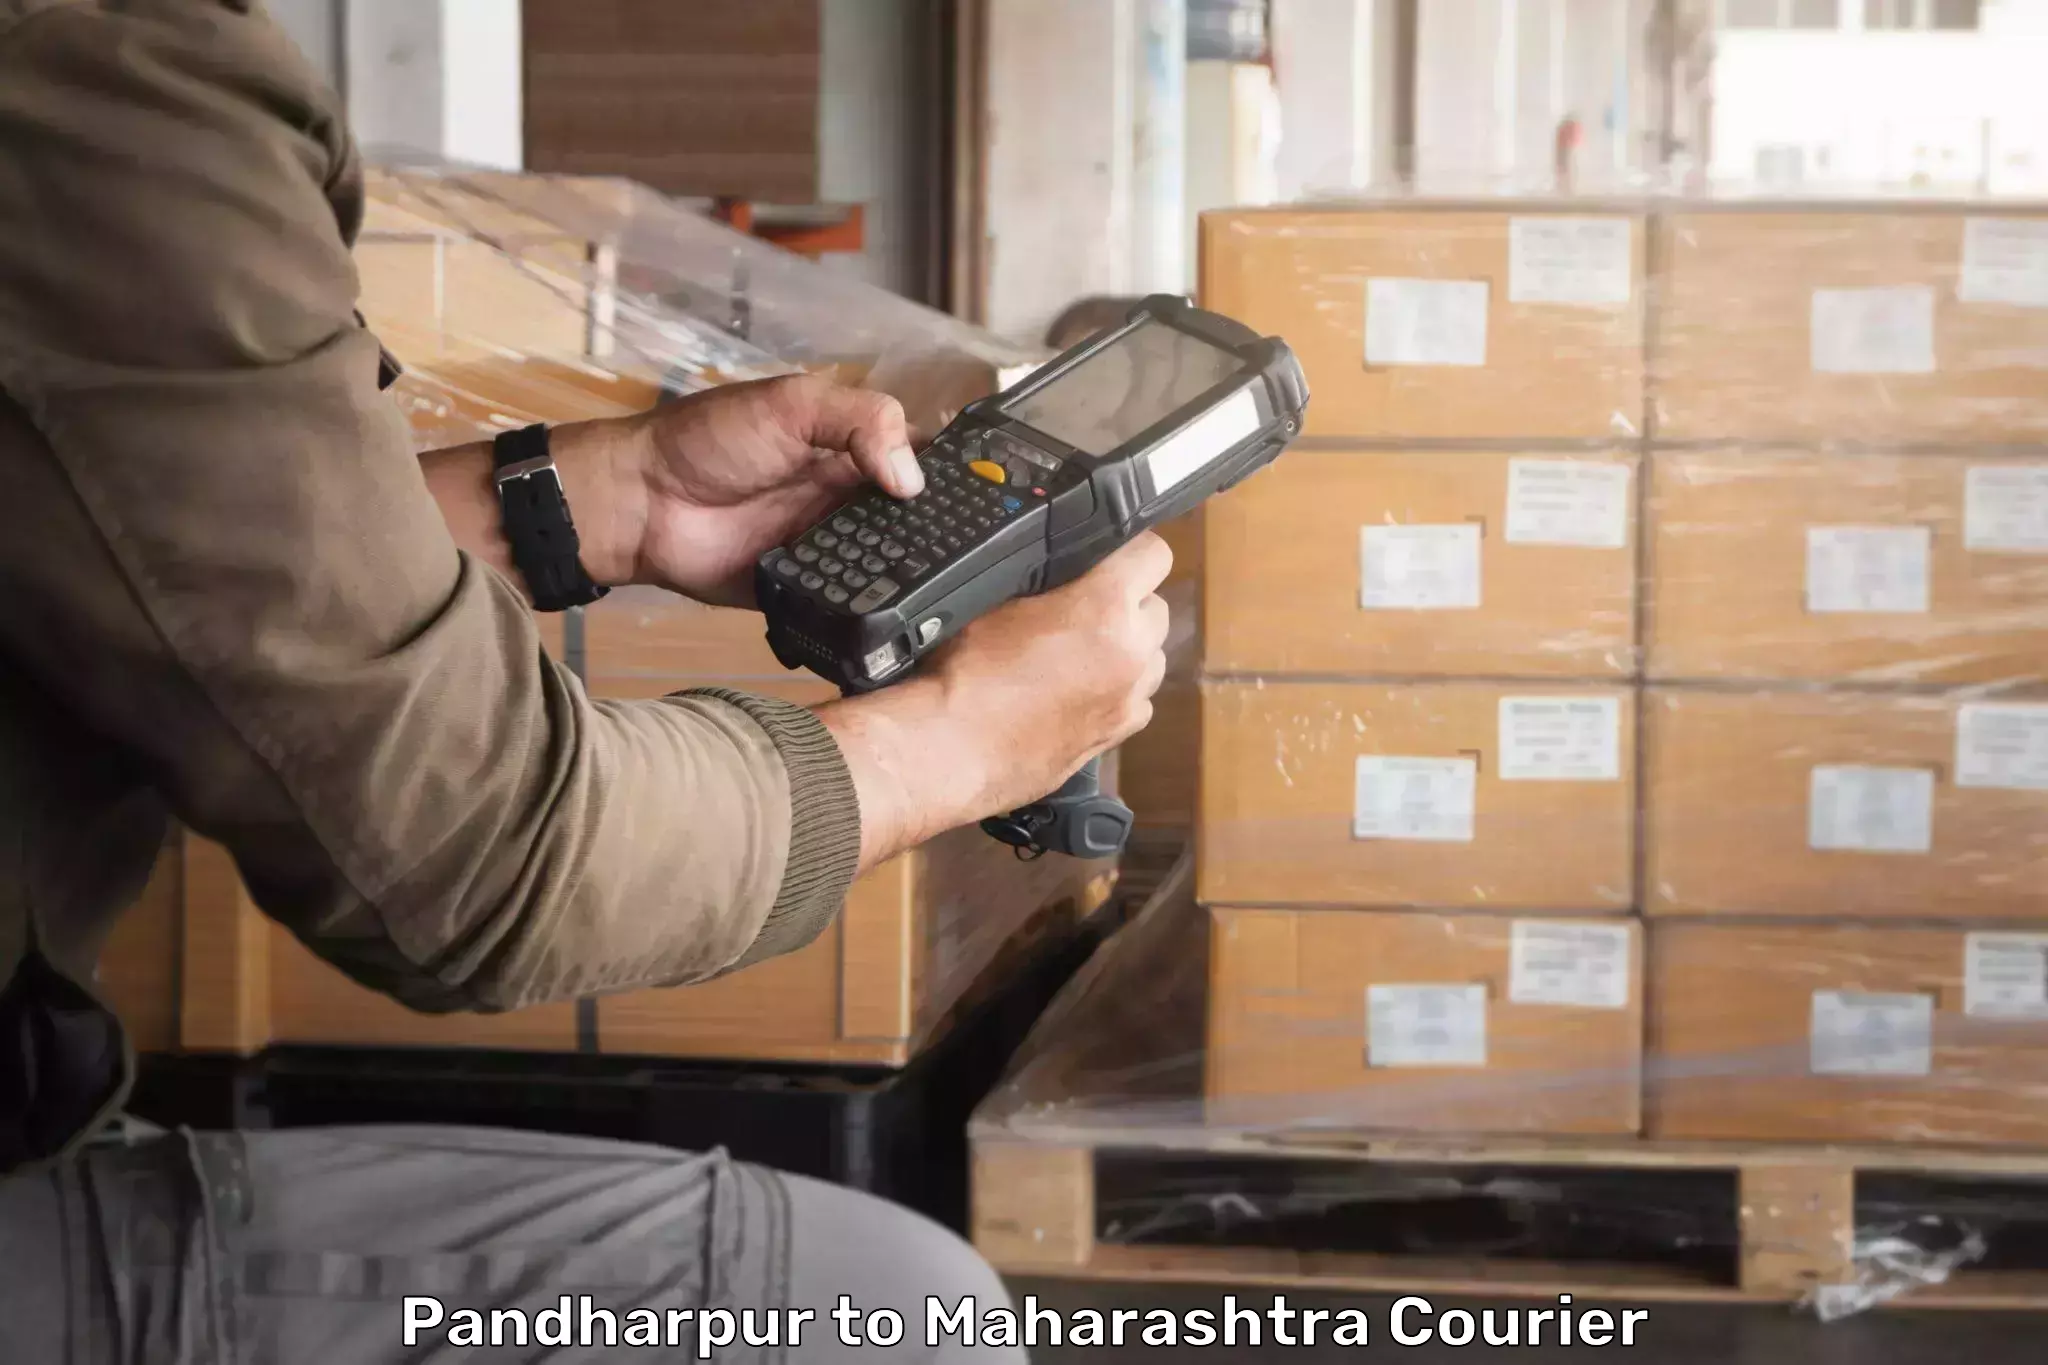 State-of-the-art courier technology in Pandharpur to Gangapur Aurangabad